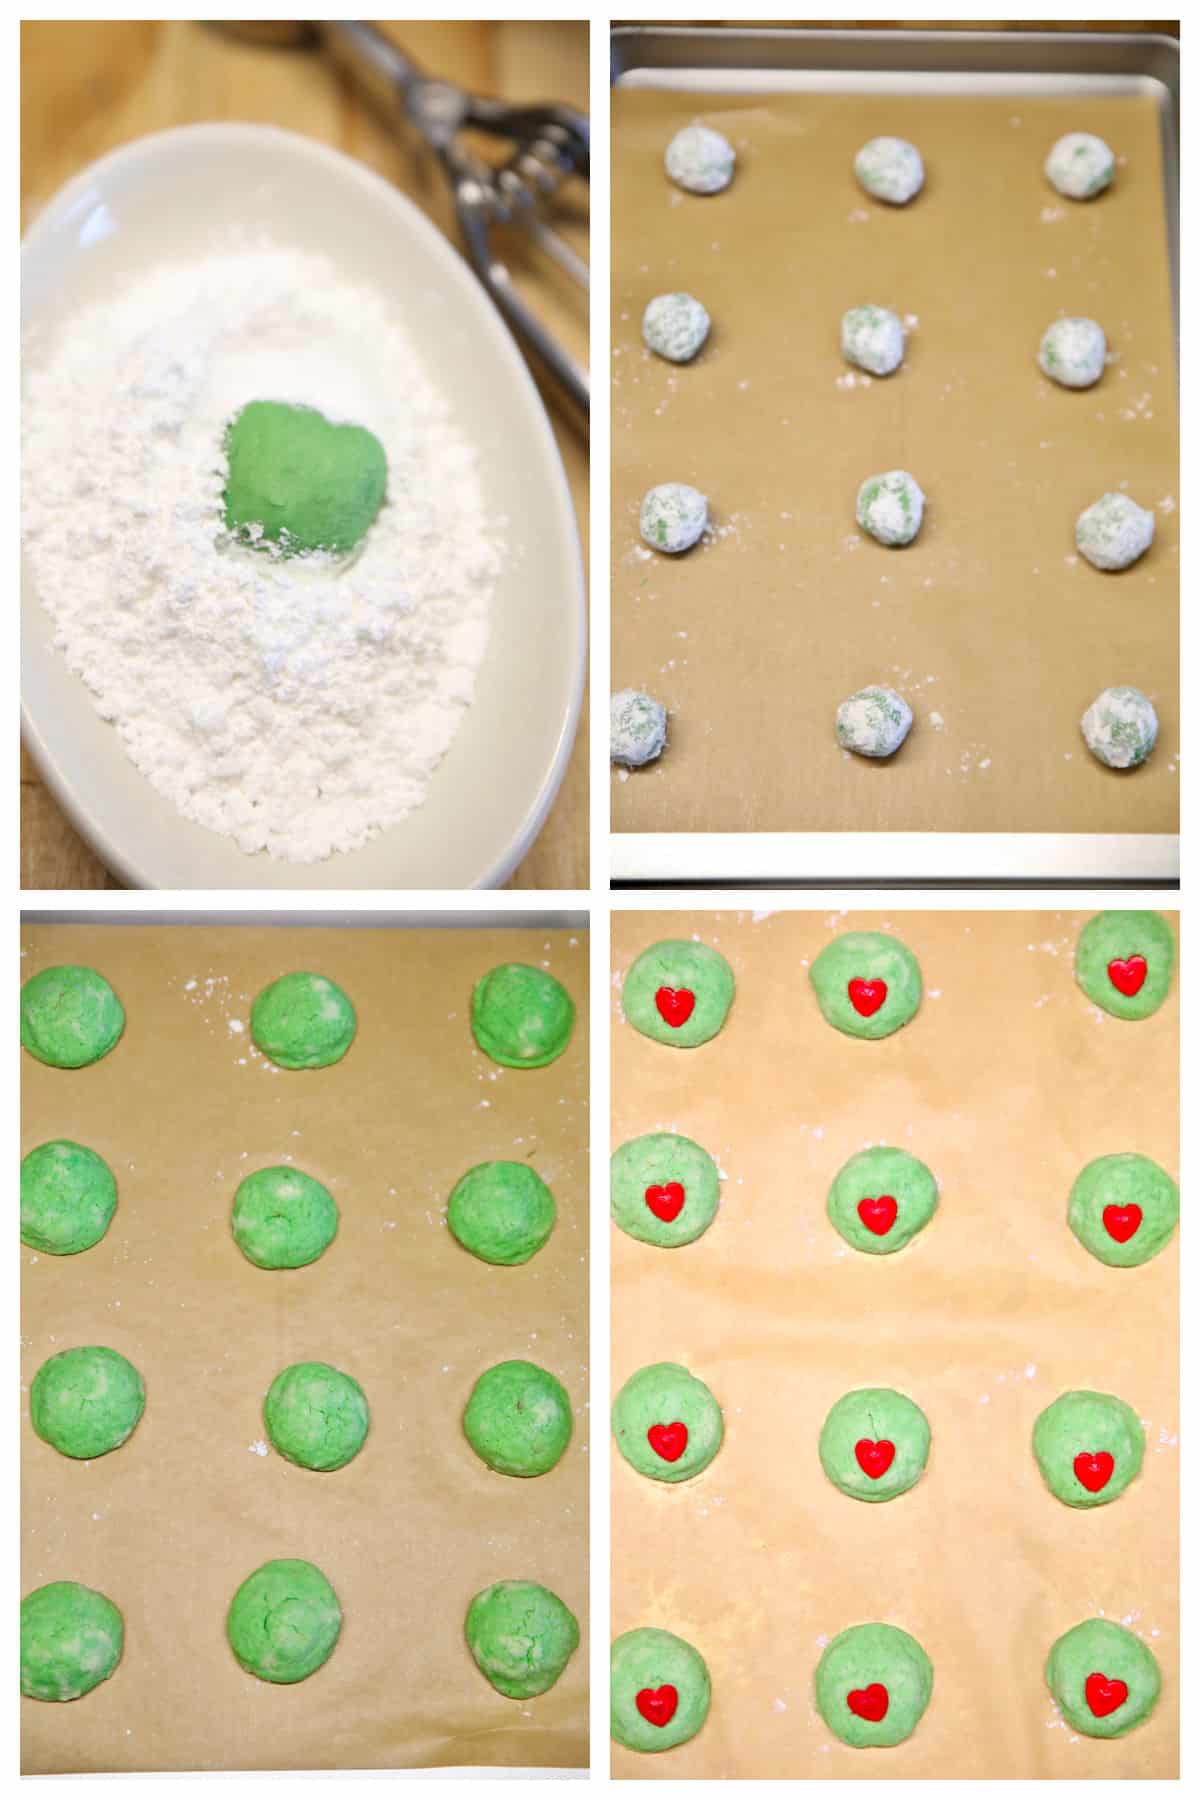 Collage rolling green cookie dough in powdered sugar, baking, adding candy hearts.